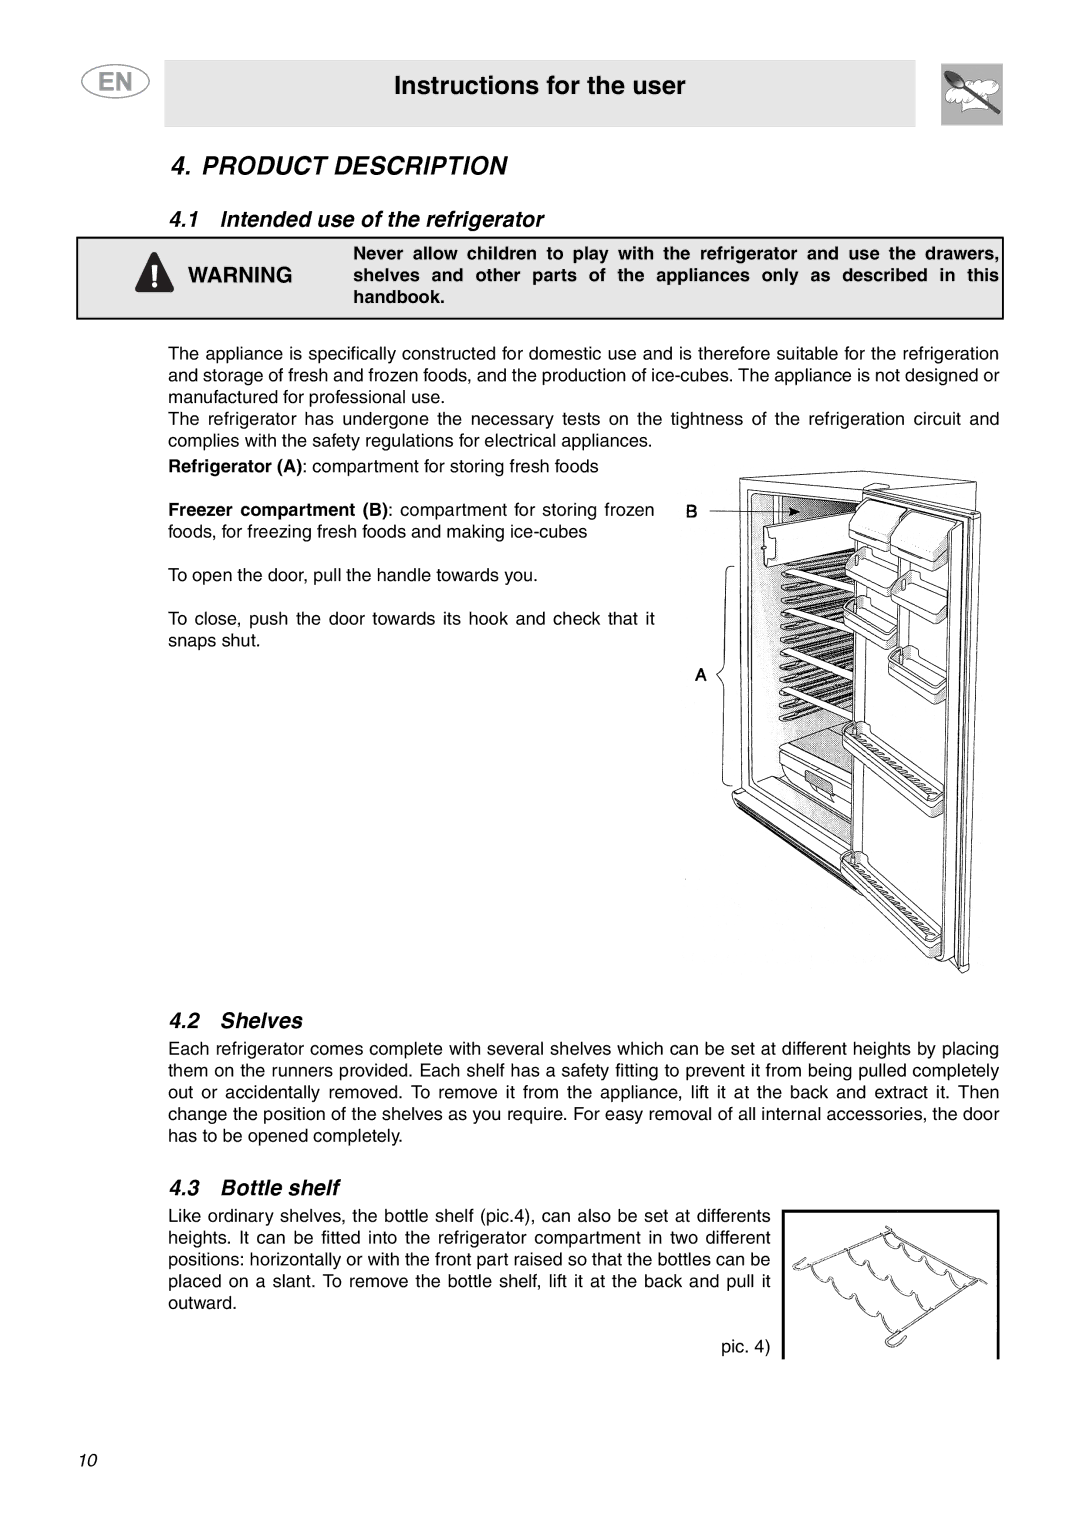 Smeg FAB28MCUS important safety instructions Product Description, Intended use of the refrigerator, Shelves, Bottle shelf 